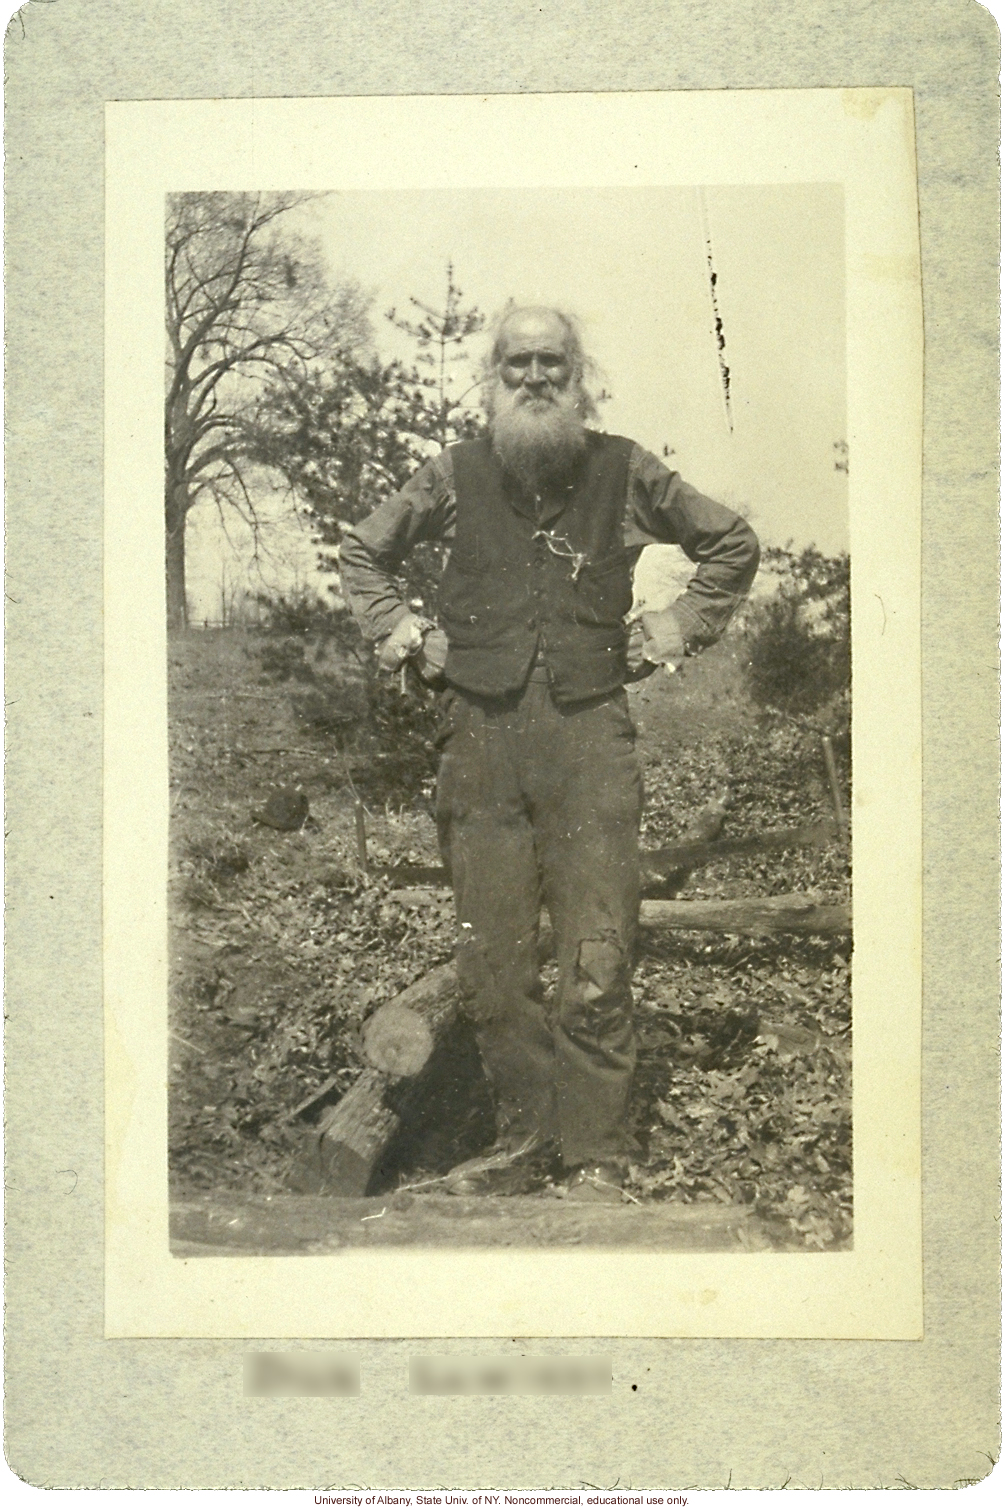 Dick Johnson (pseudonym) of the Win Tribe, from Arthur Estabrook's scrapbook of field photographs from Amherst County, Virginia